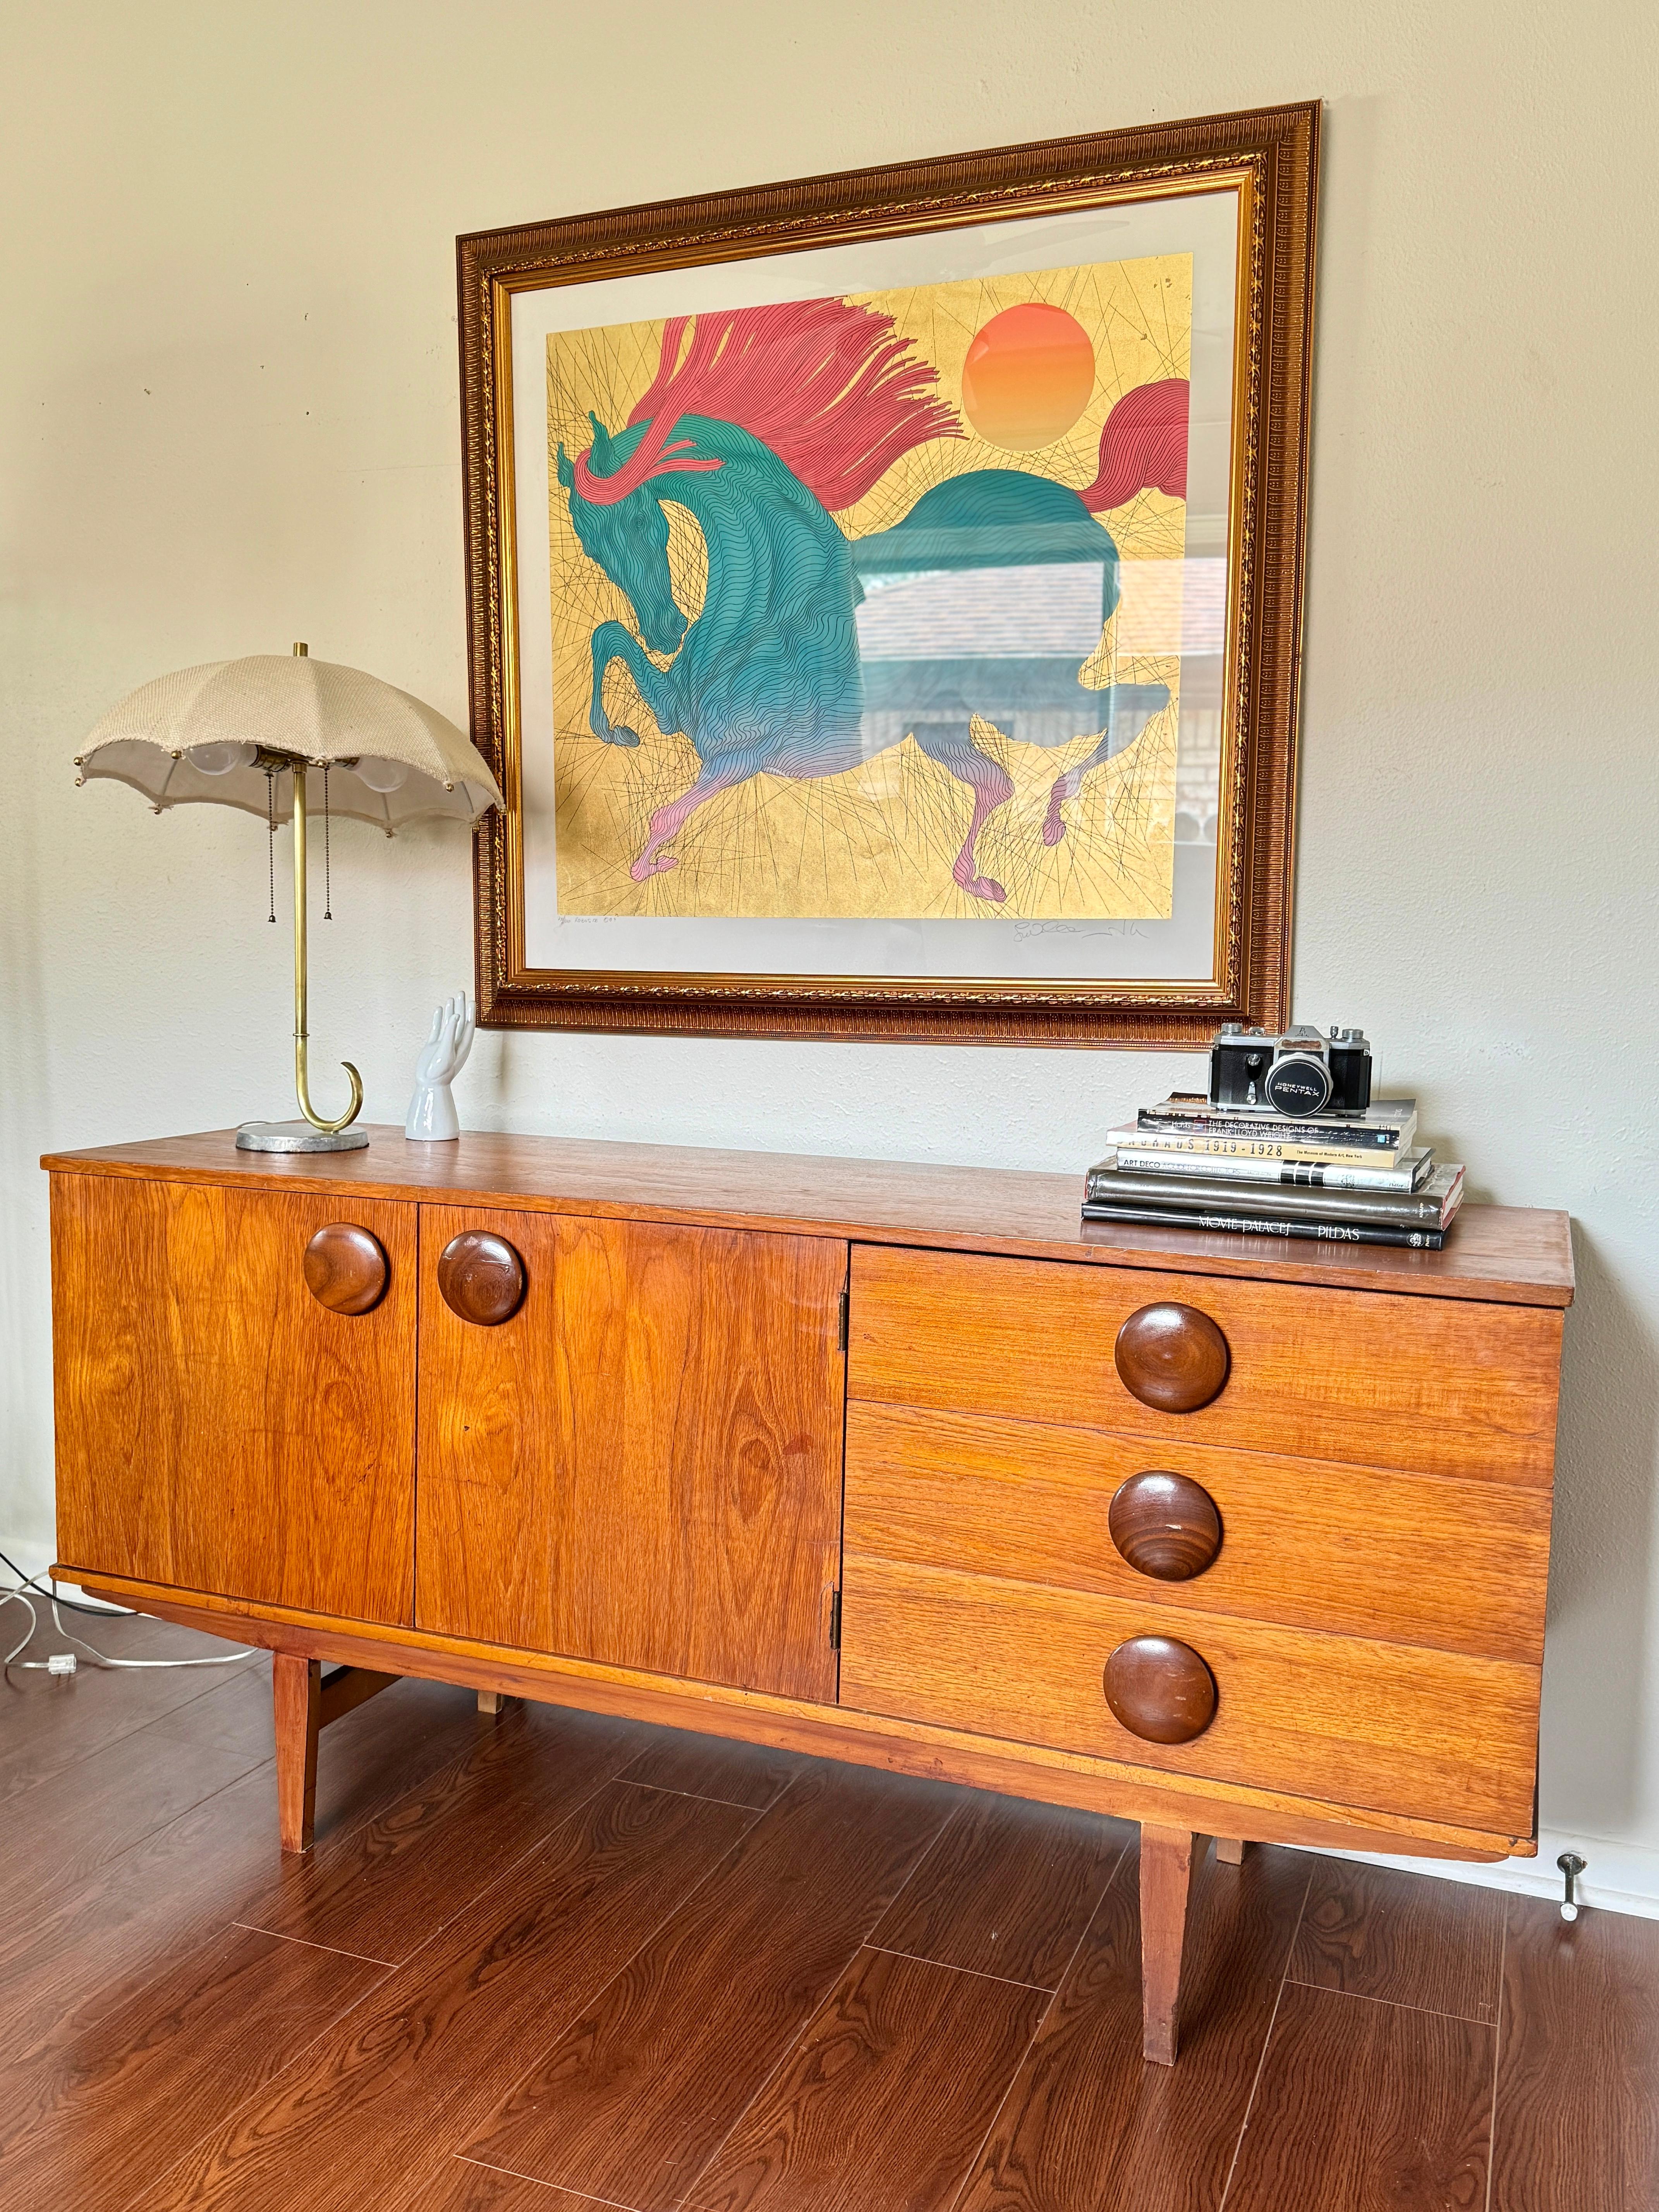 A rare mid century modern sideboard with round wooden pulls, circa 1960s. Maker is unknown. Structurally sound and all drawers open and close smoothly, but there are some cosmetic flaws. Please see photos.

29” H x 60” W x 17.5” D
